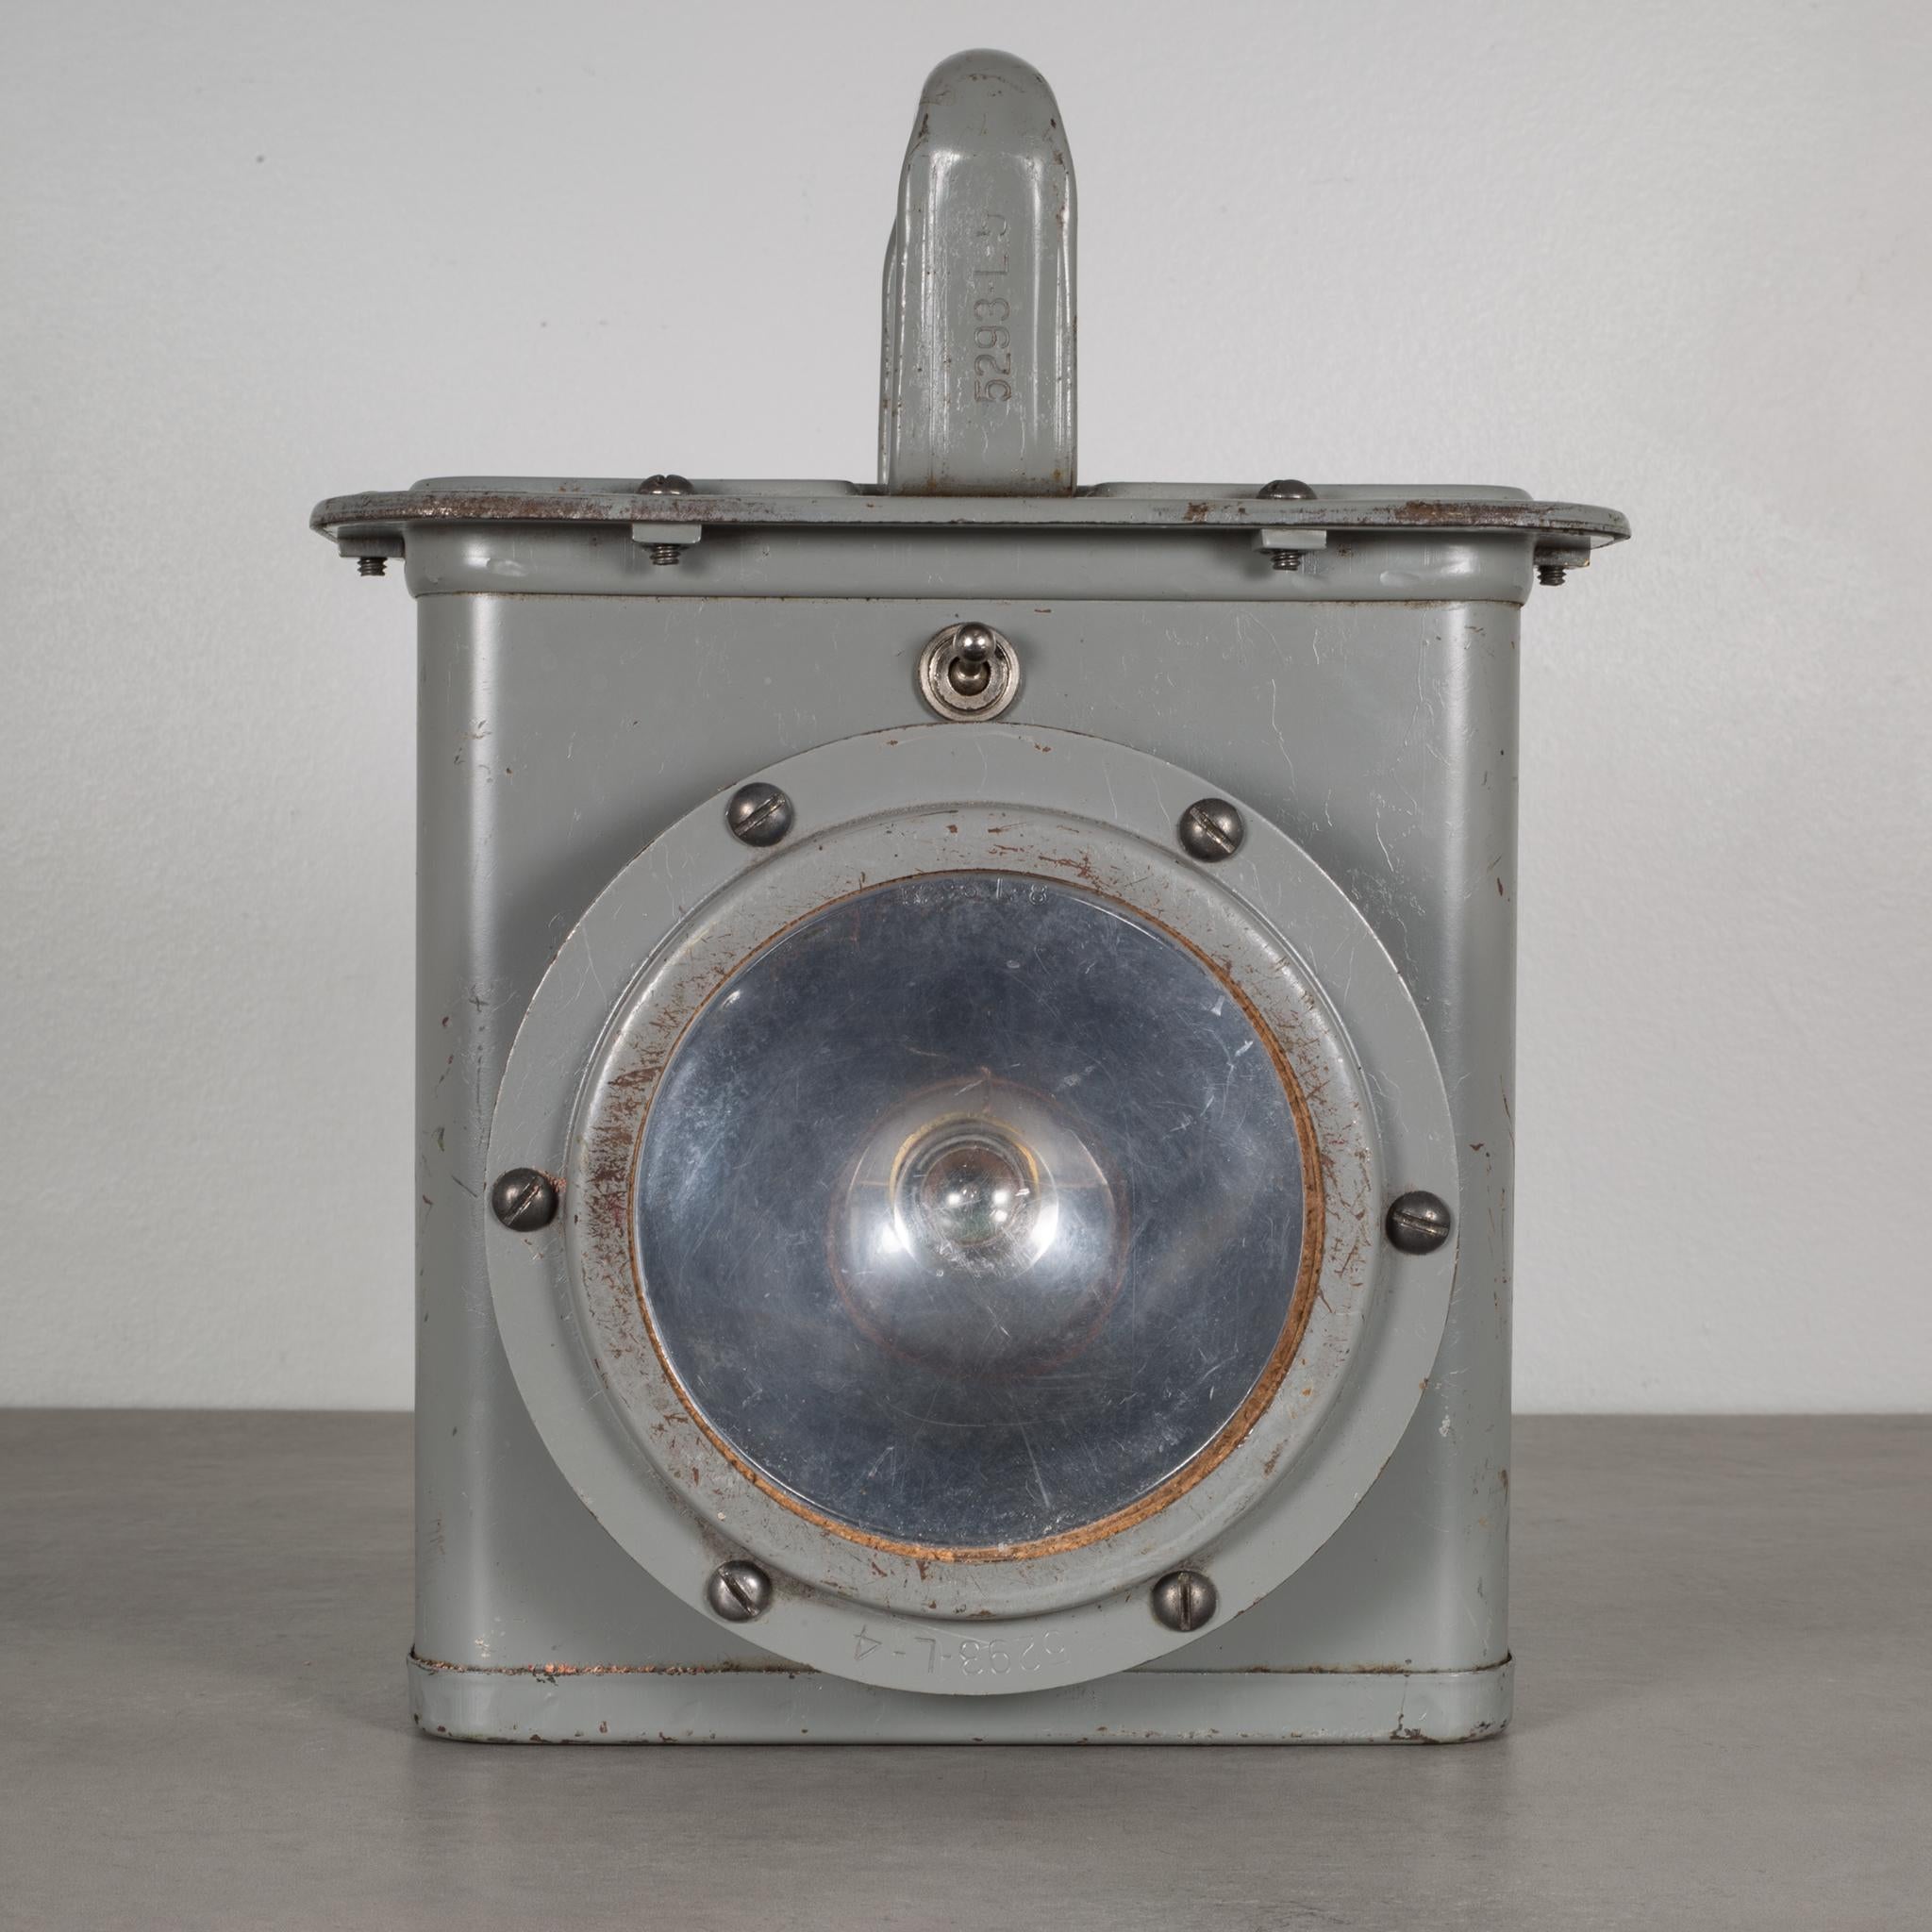 About:

This is an original U.S. Navy J-IS ship lantern light. The light has a switch in the front that turns it on. The light is in good working order. This piece has retained its original finish and has some minor blemishes. There are few